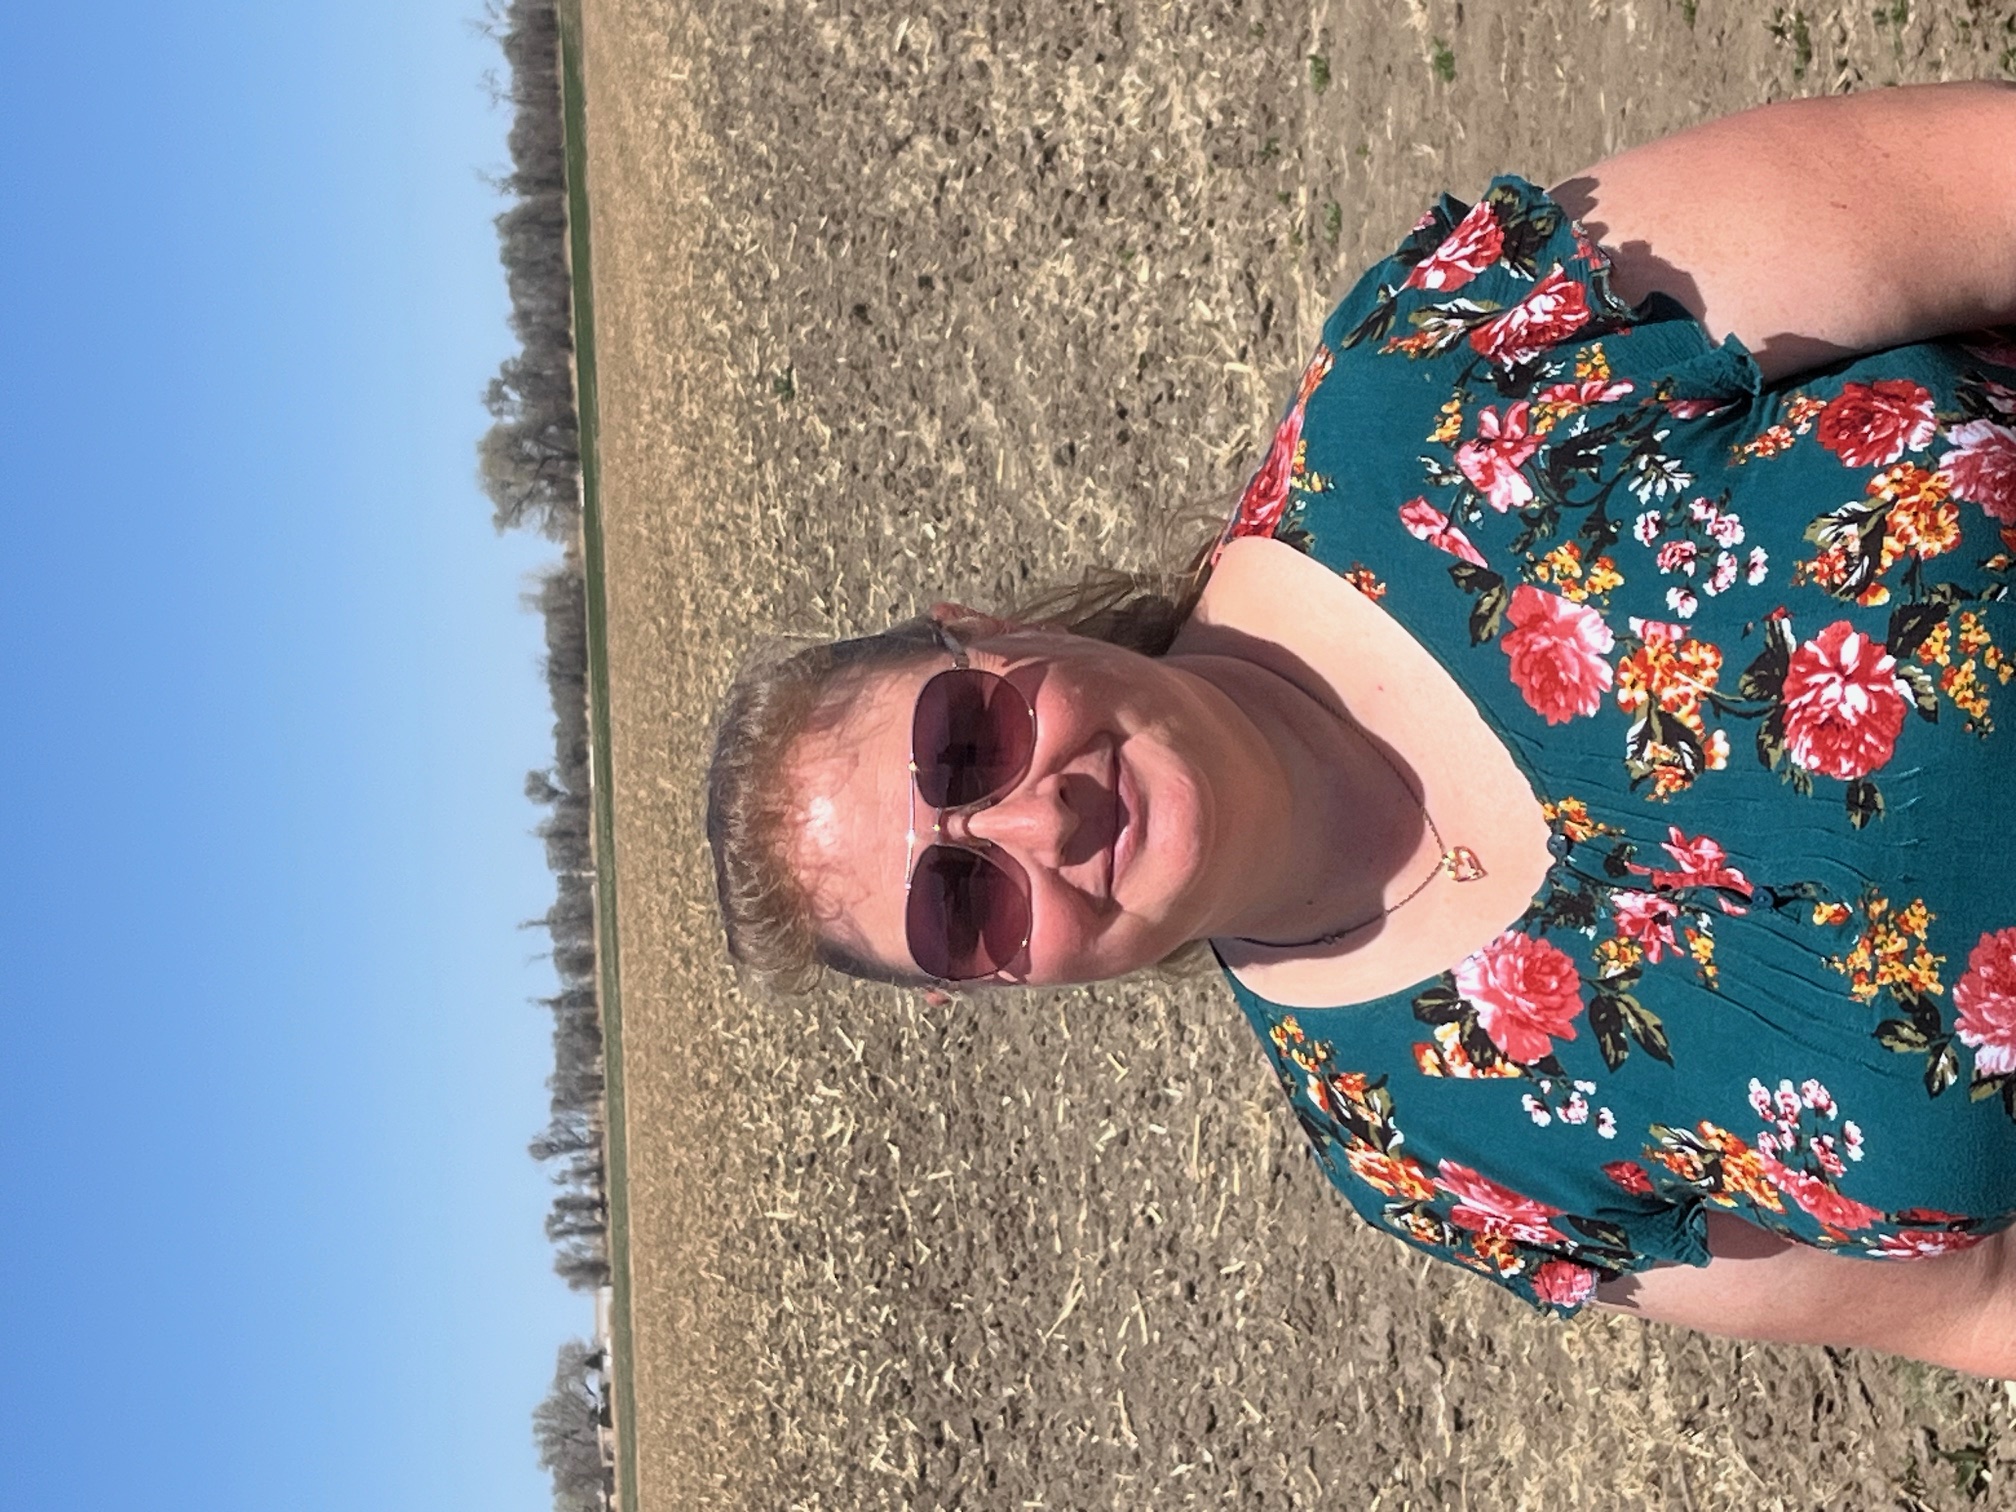 Michelle has sunglasses on and stands in front of a plowed field.